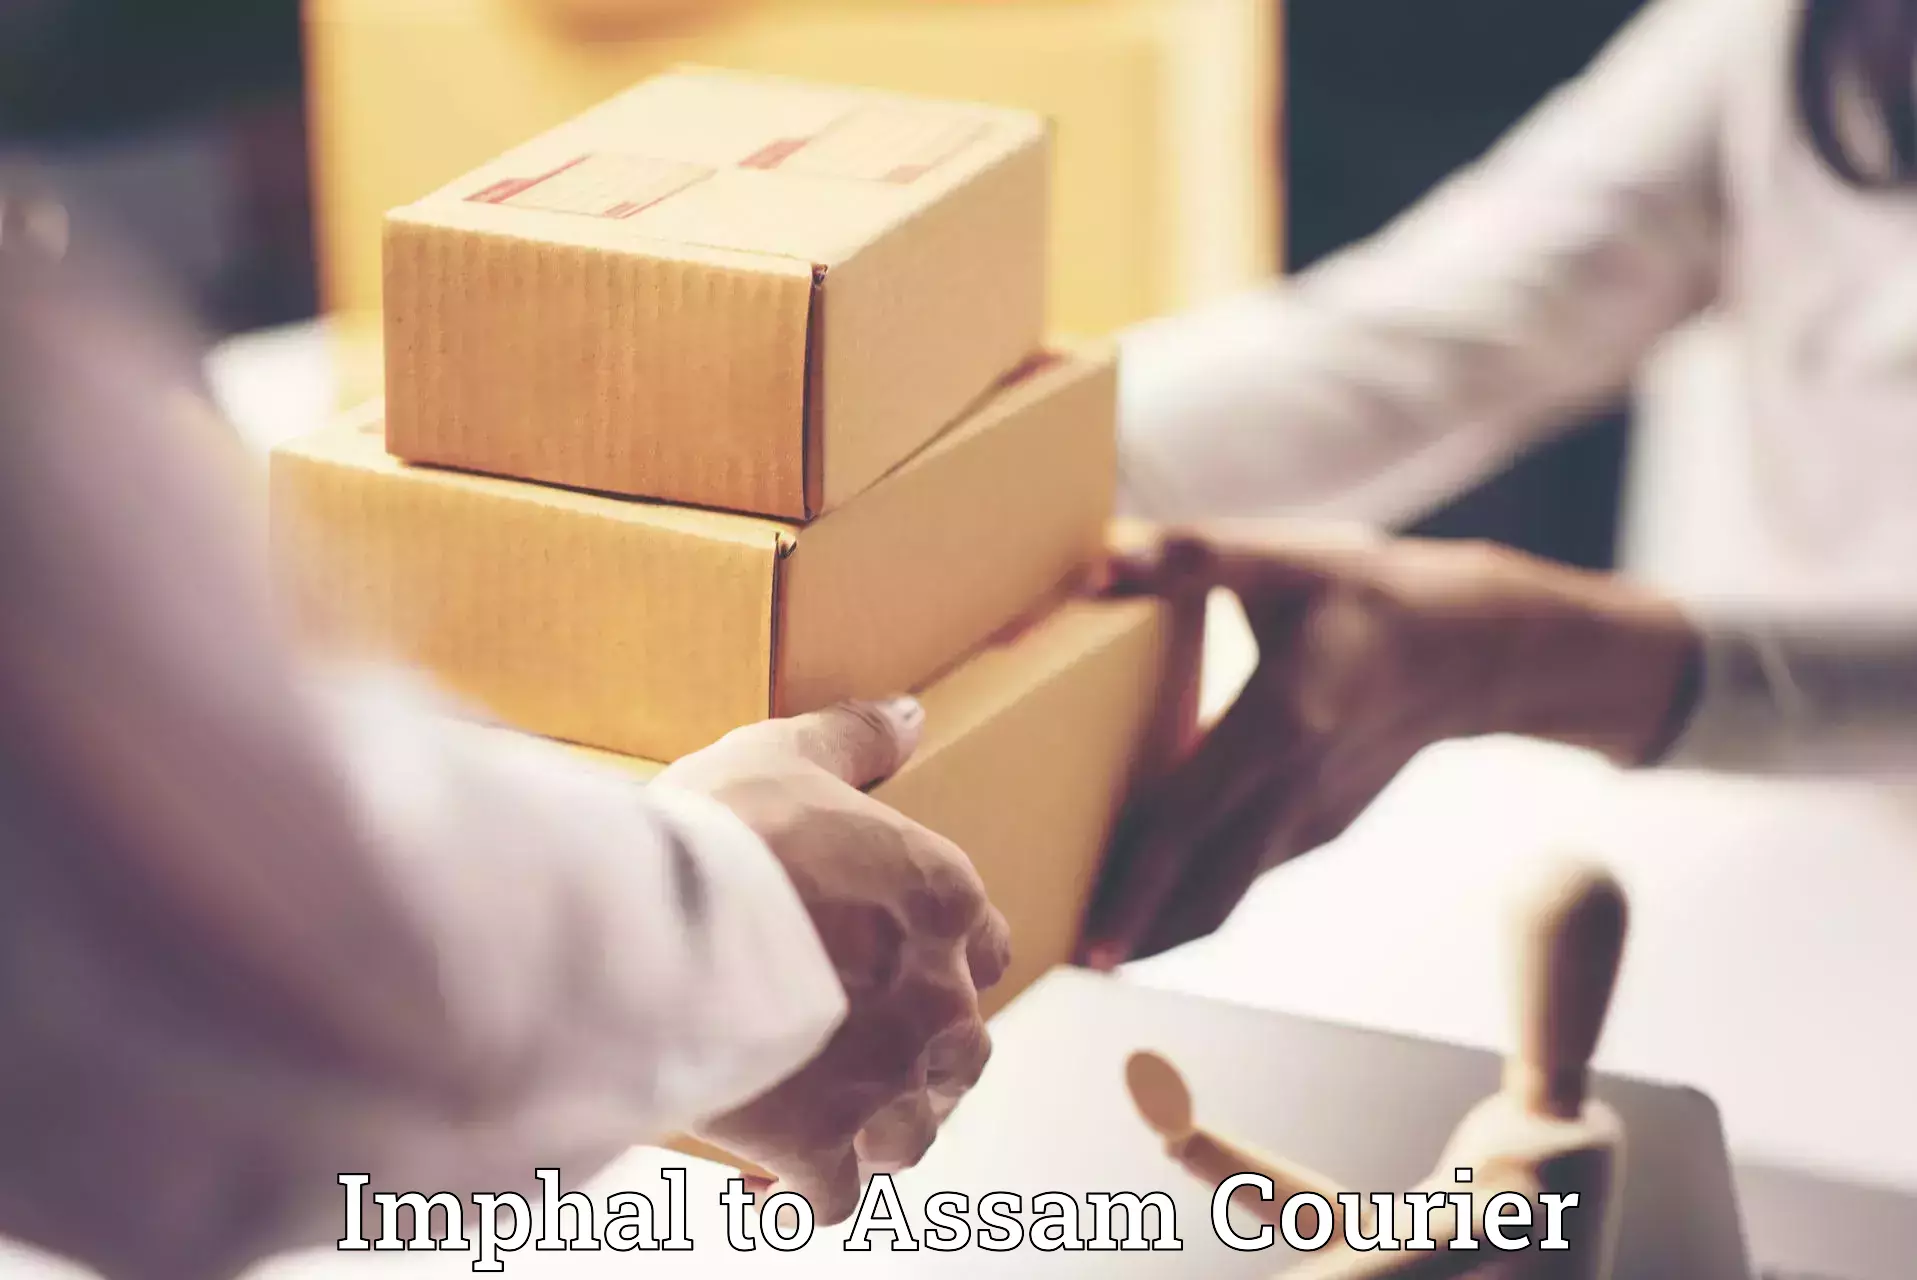 Luggage shipment tracking Imphal to Assam